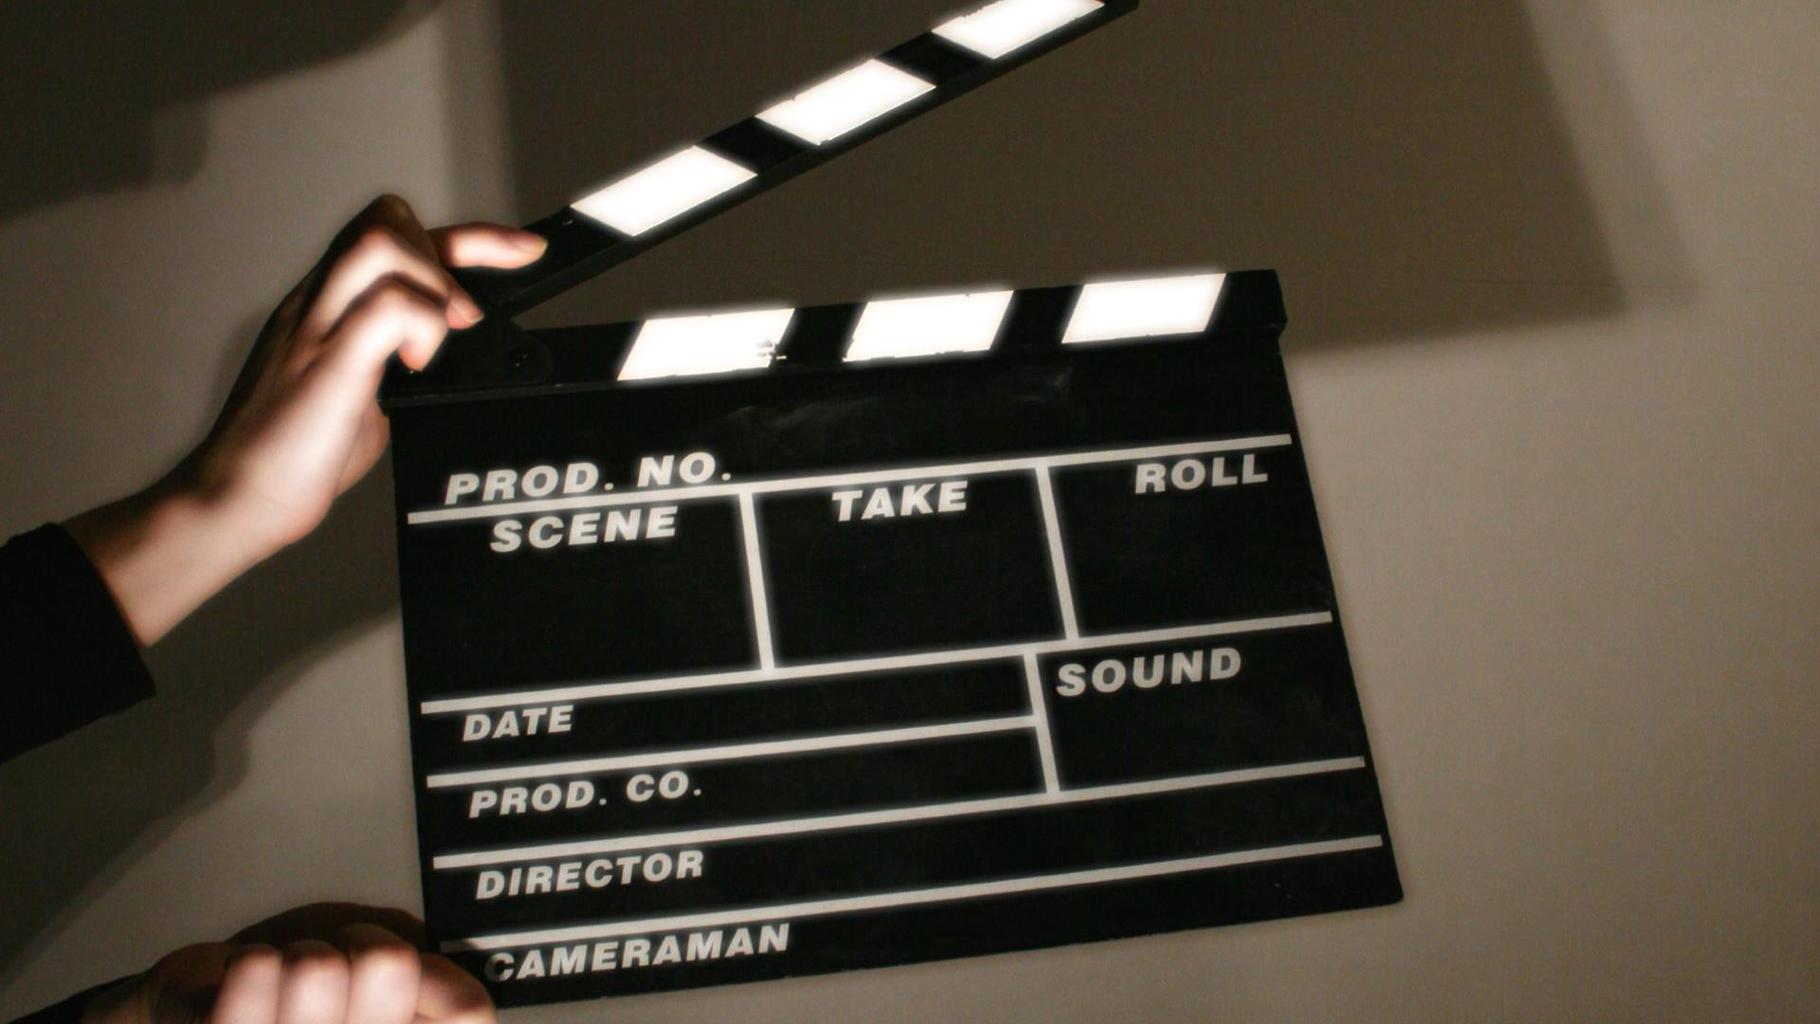 A clapper board used by production crews. By Christian Wagner for FreeImages.